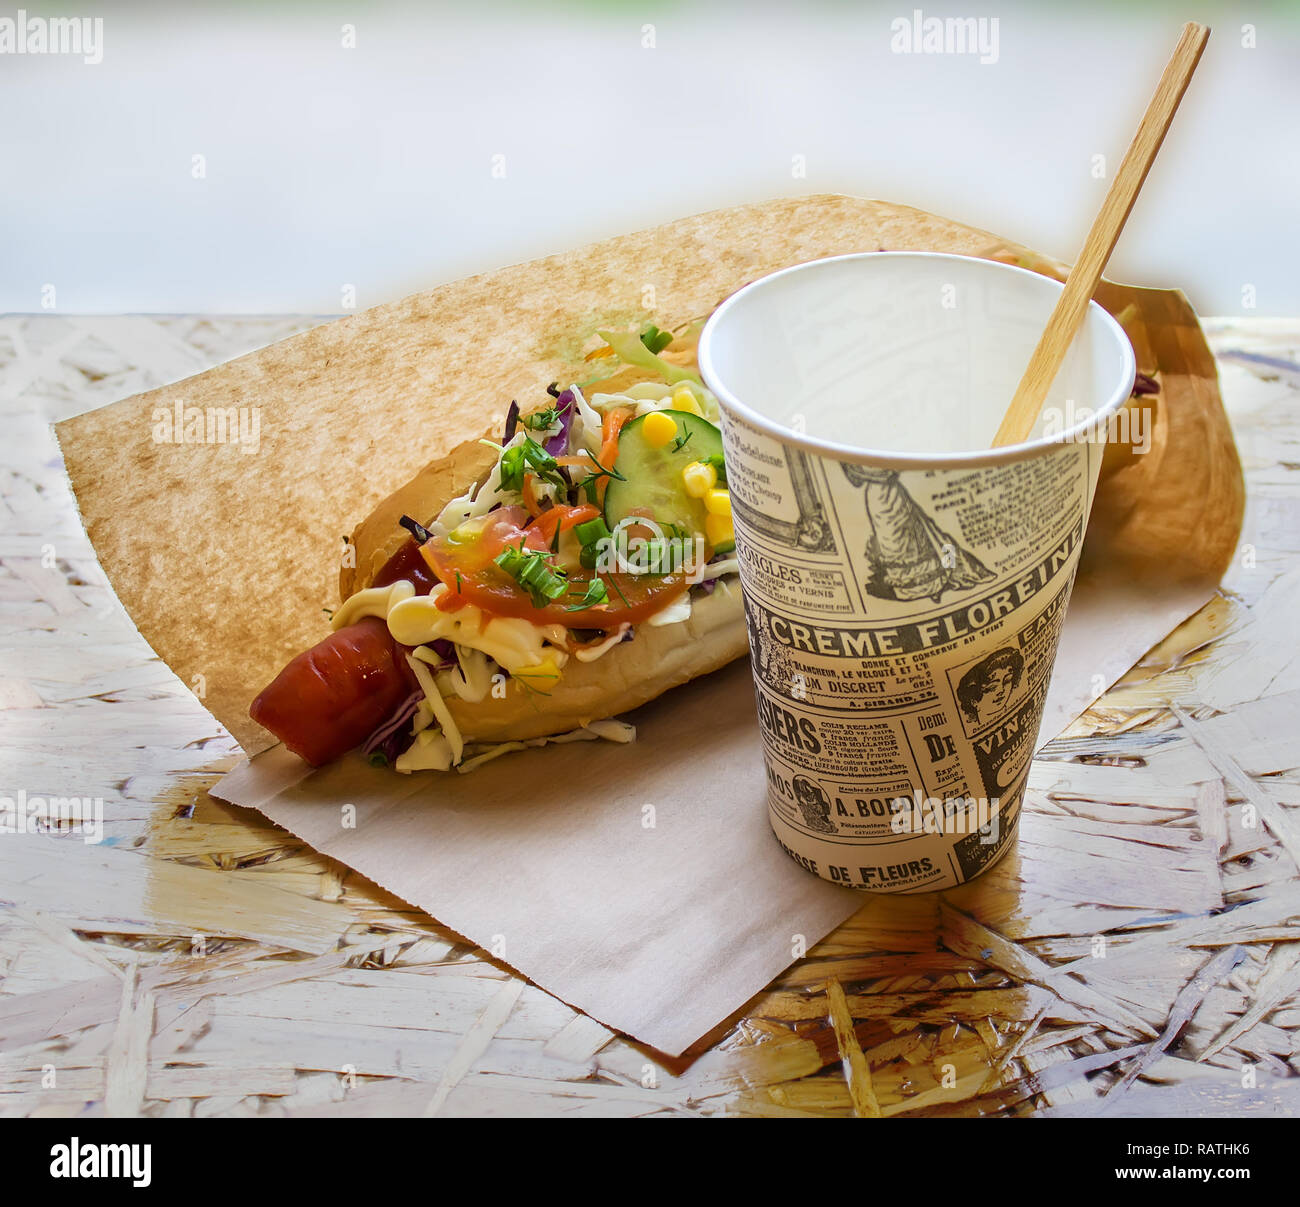 Street food, hot hotdog packed in a paper bag Stock Photo - Alamy